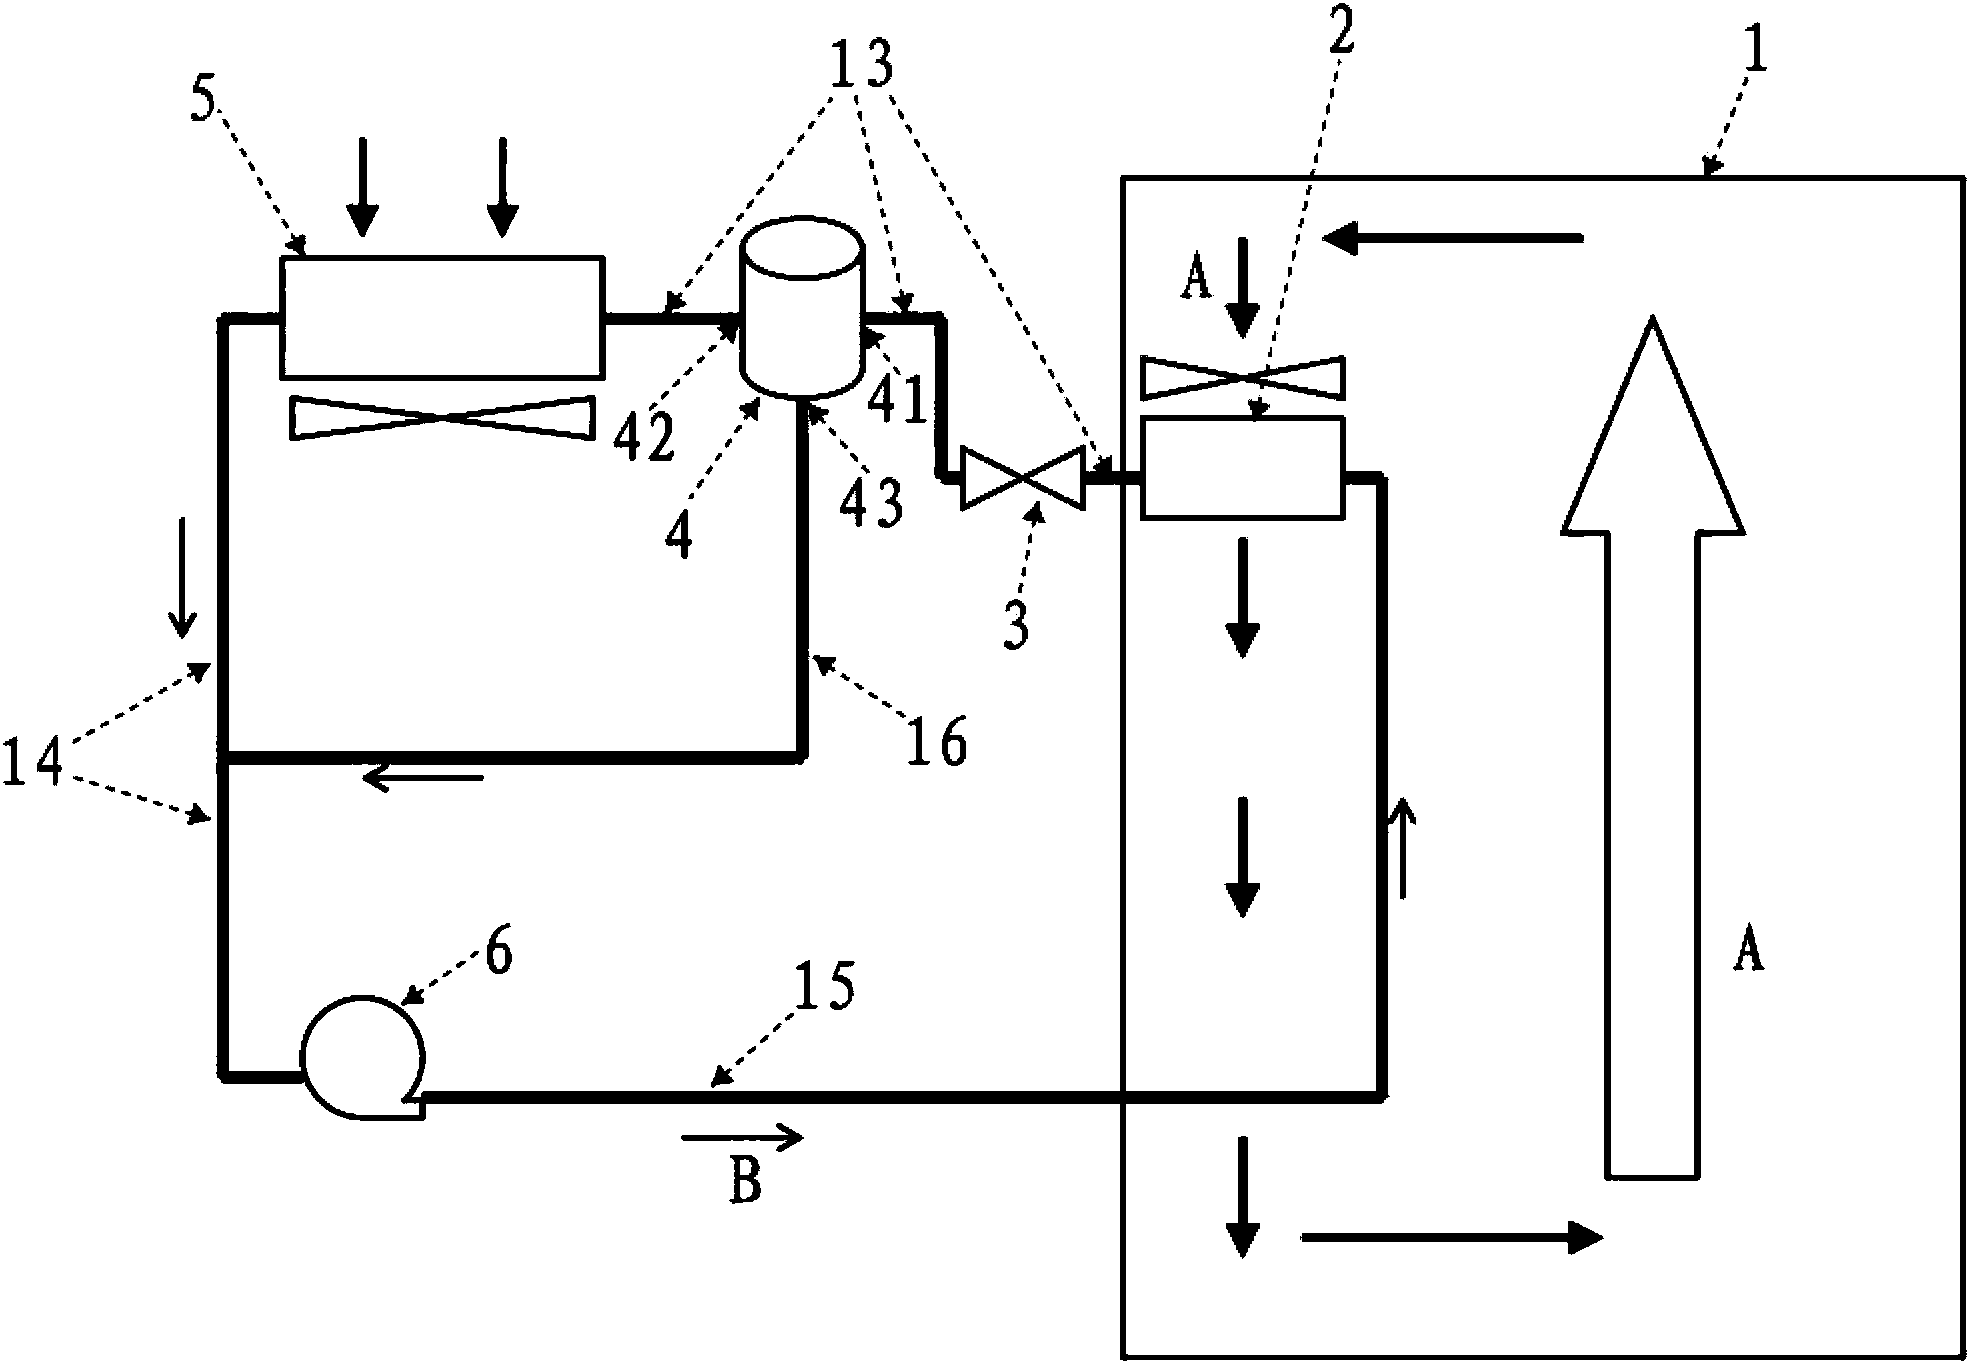 Liquid phase-change heat transfer type pumping cooling system with booster pump